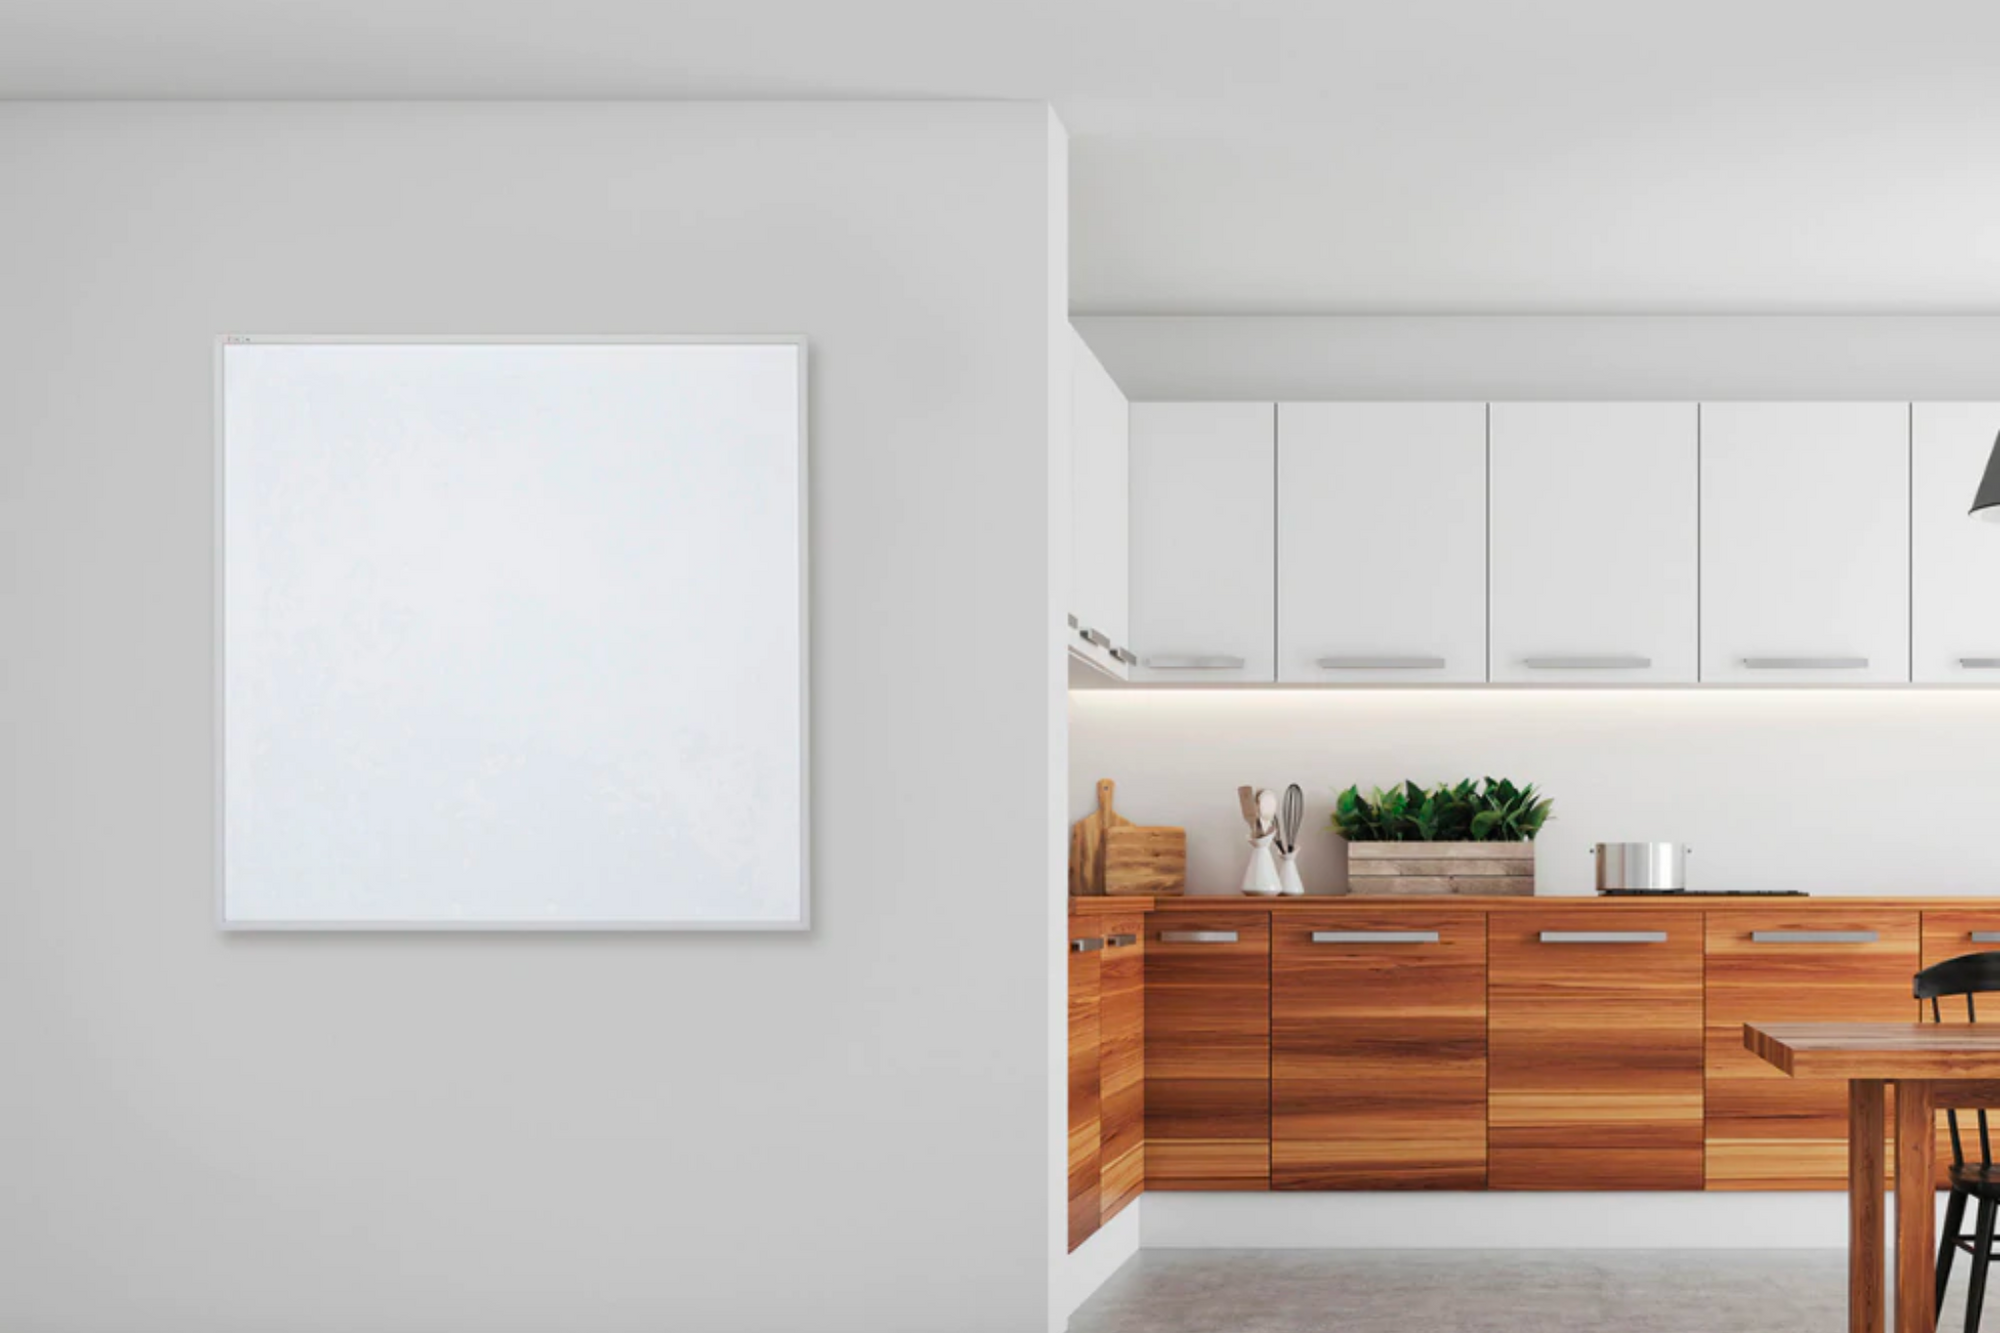 Infrared Panels - A Heating Solution